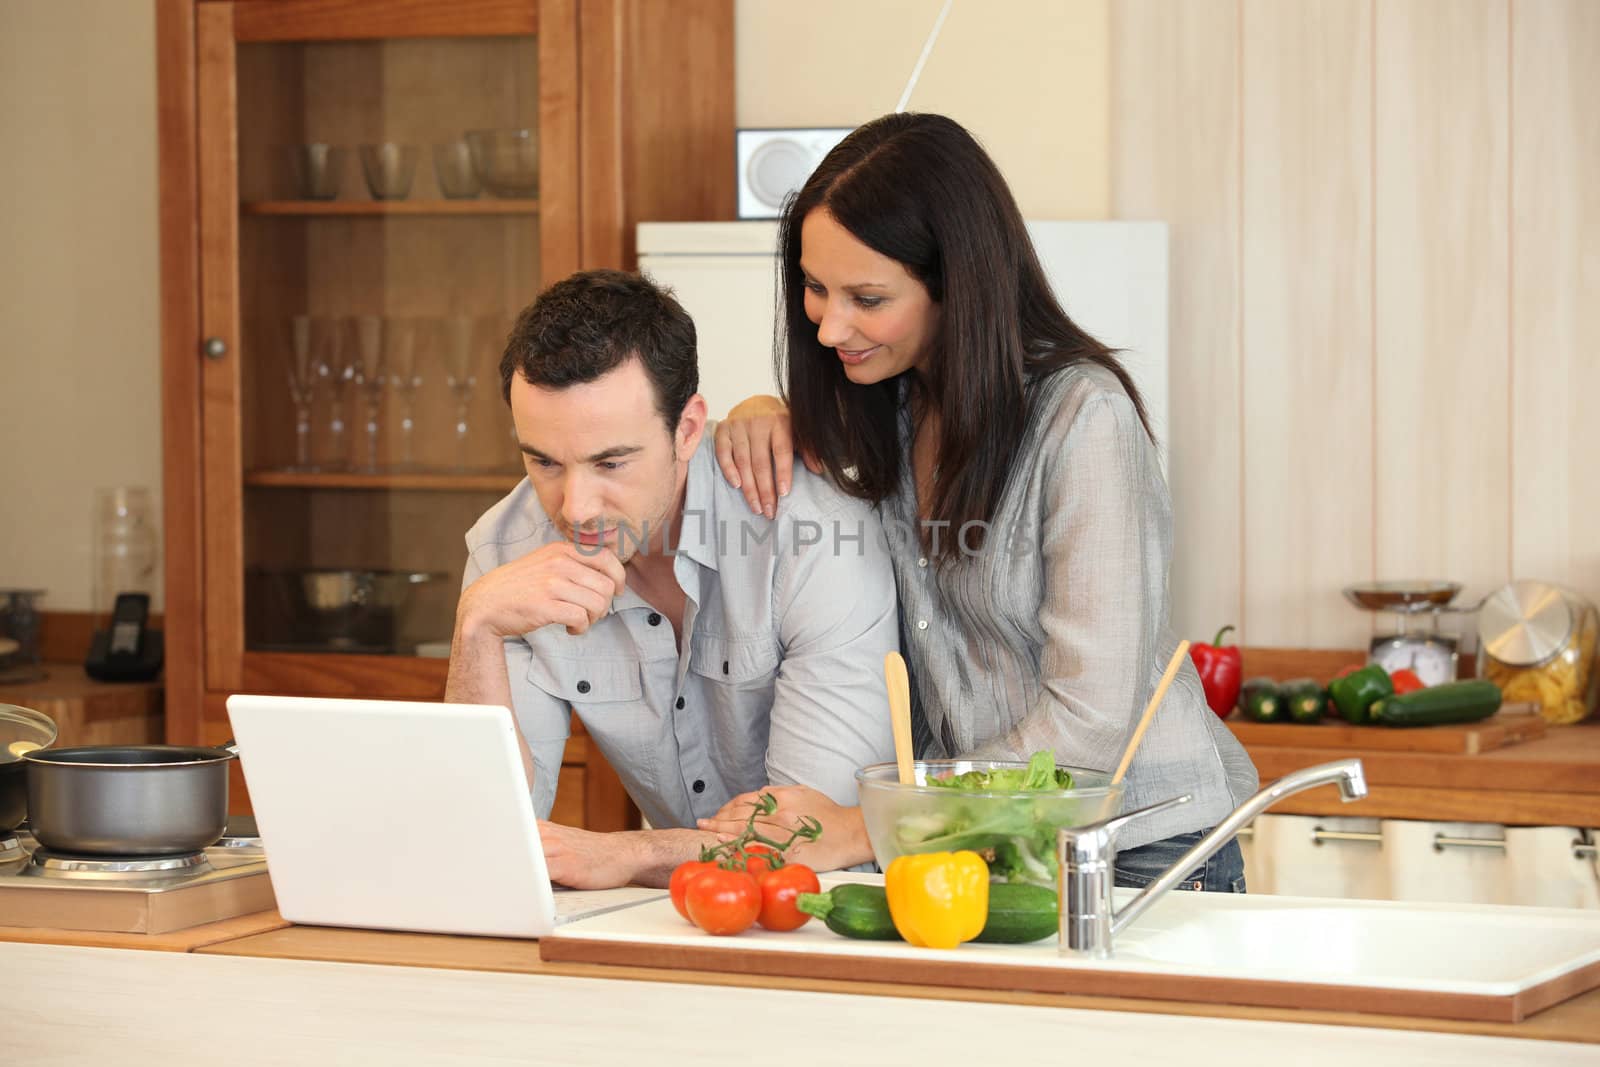 Couple looking at a laptop in their kitchen by phovoir